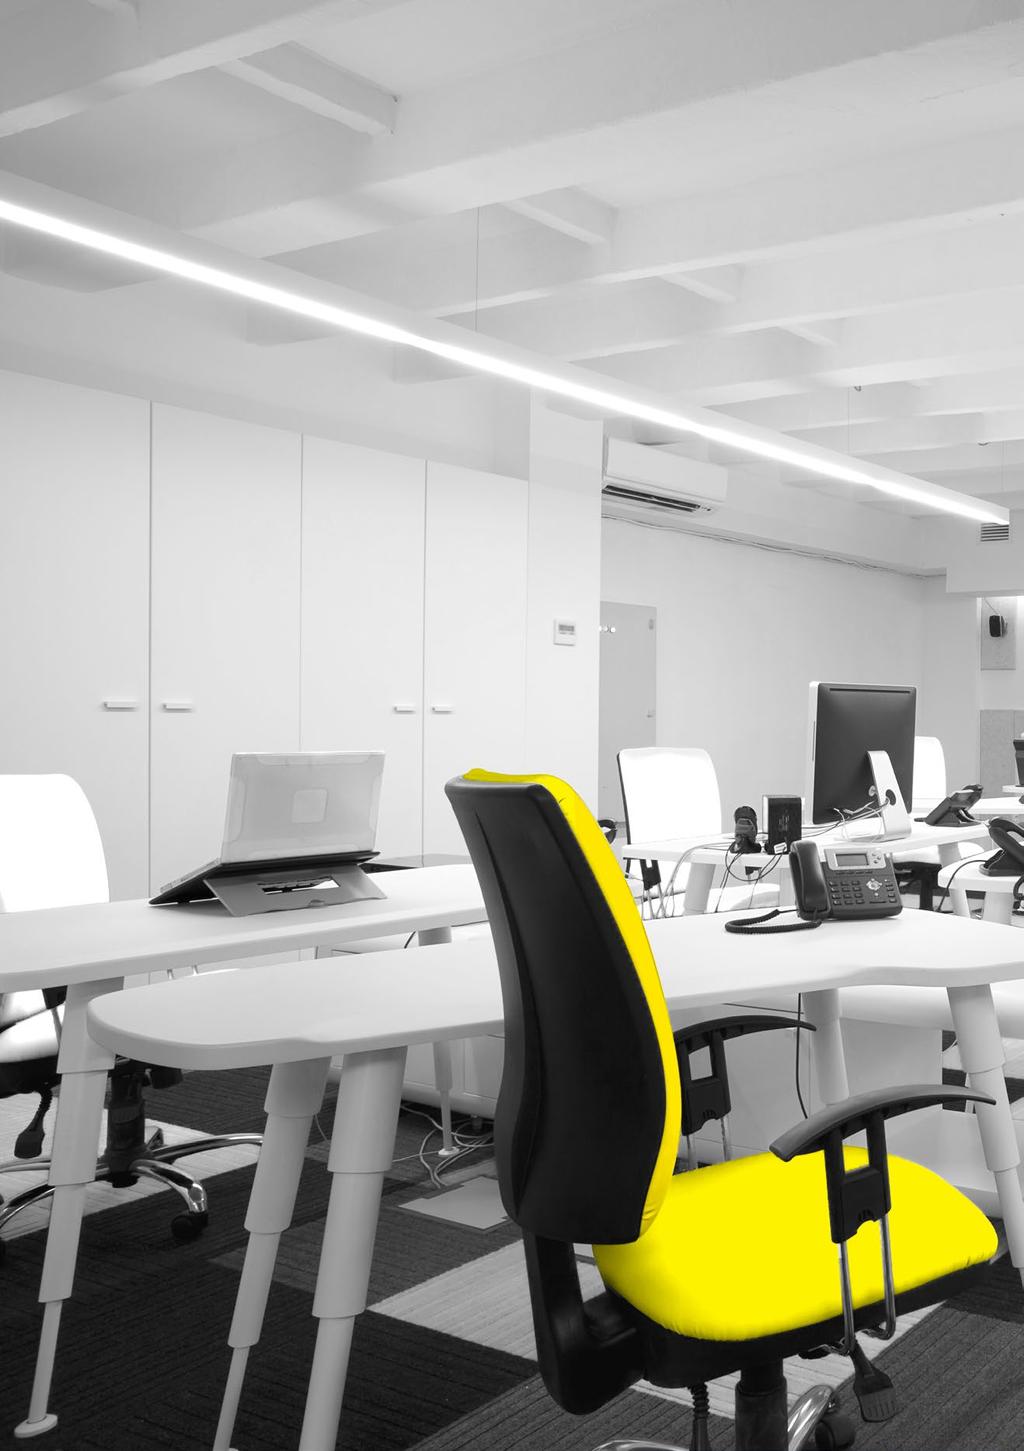 OFFICE LIGHTING IN A NUTSHELL Offices consist of many different types of rooms and areas: work areas, public areas, hallways, meeting rooms, showrooms, kitchens, places for relaxation each